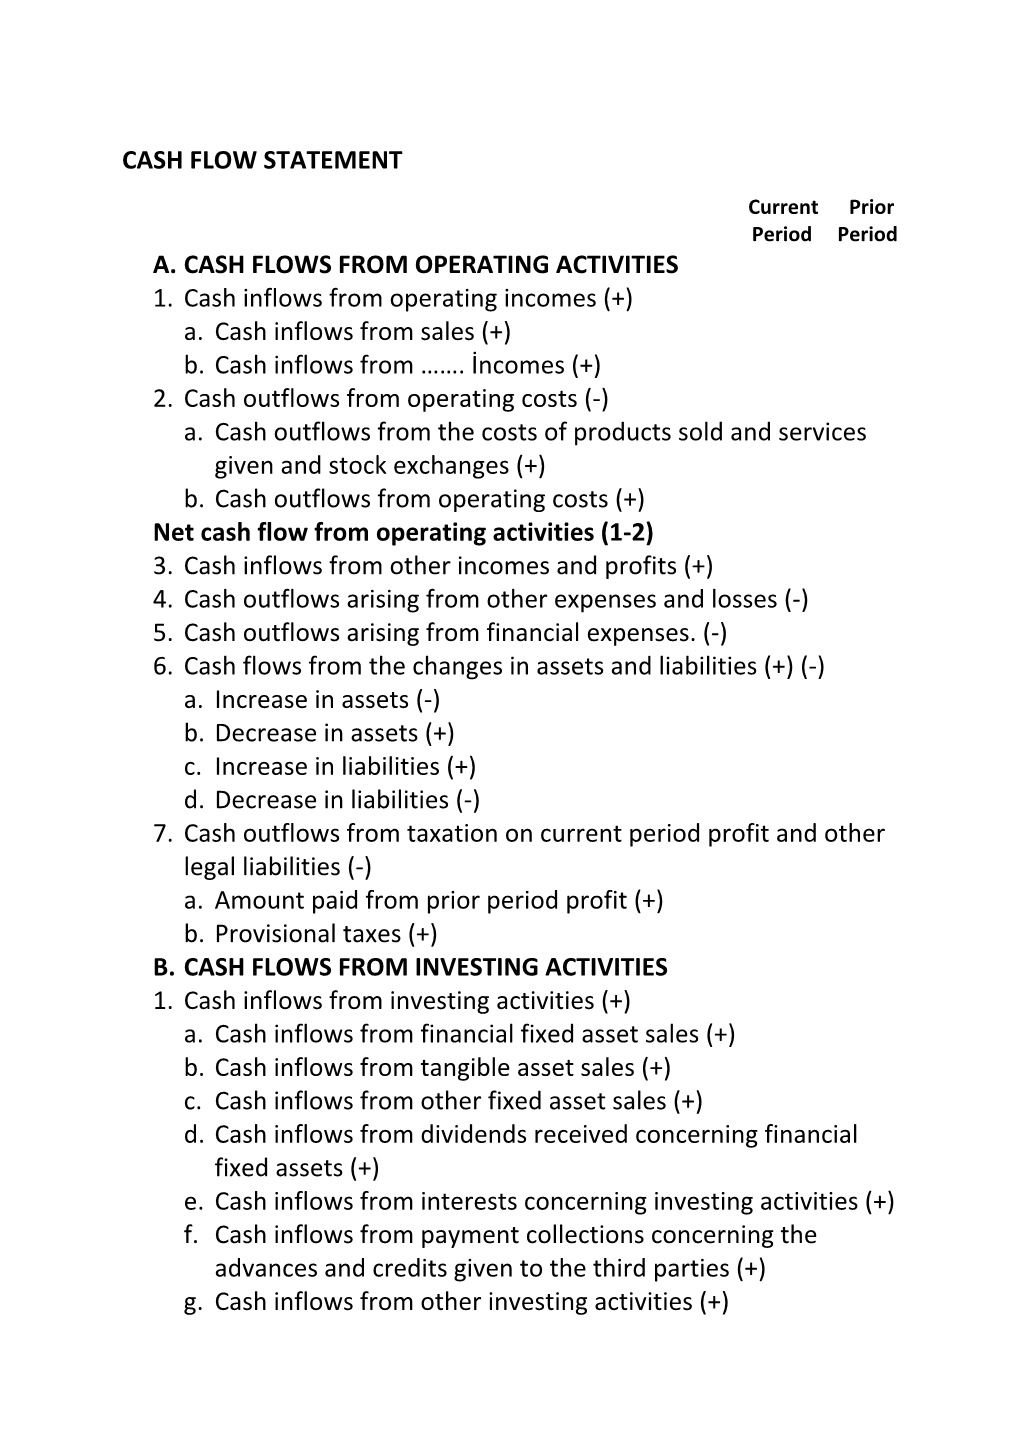 Cash Flow Statement A. Cash Flows from Operating